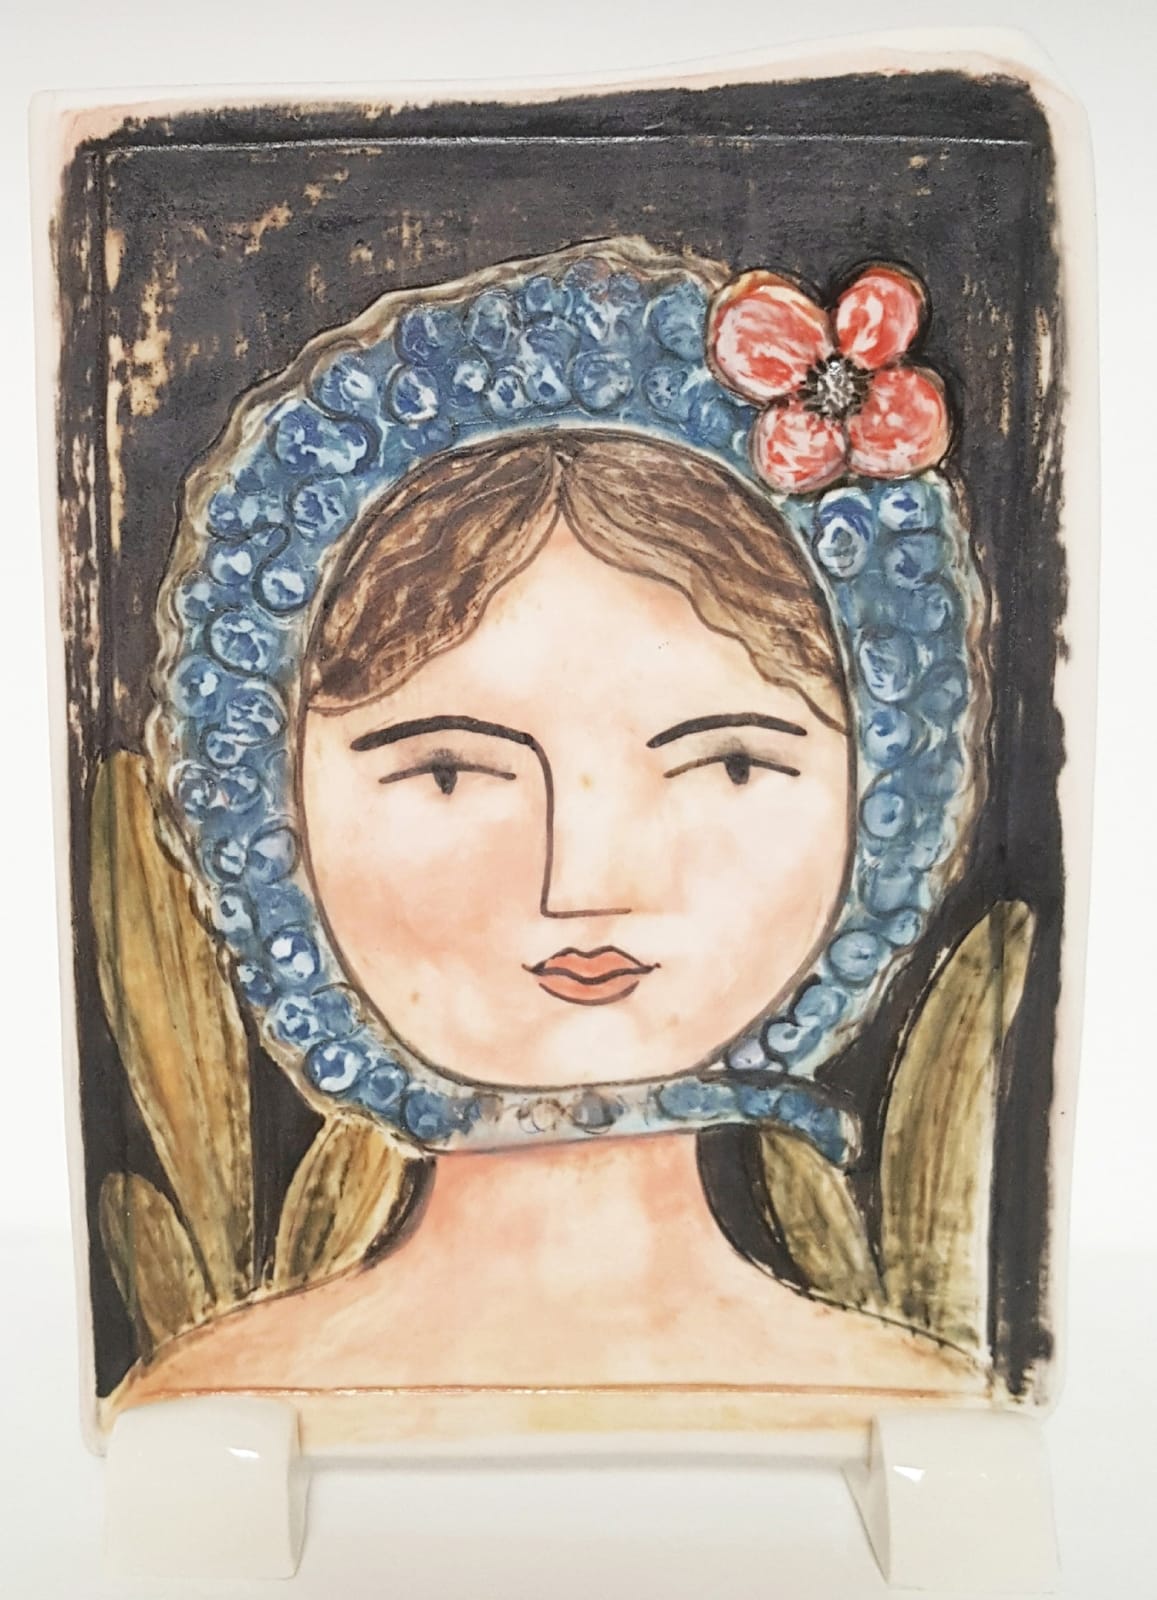 Clare Nicholls, Blue Swimming Cap with Red Flower, 2020